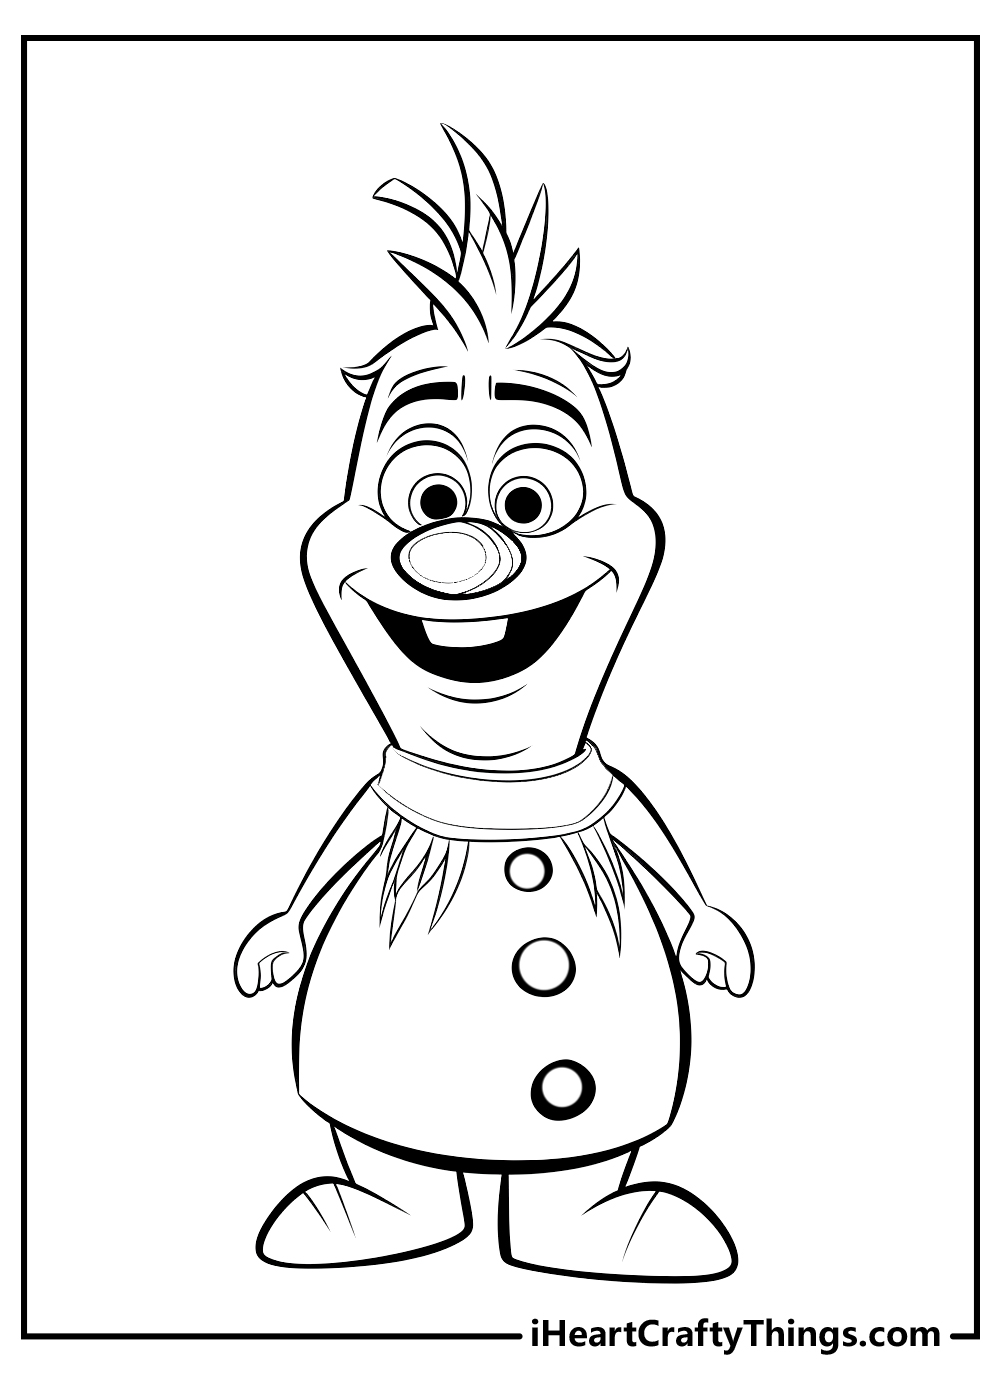 olaf from frozen coloring printable